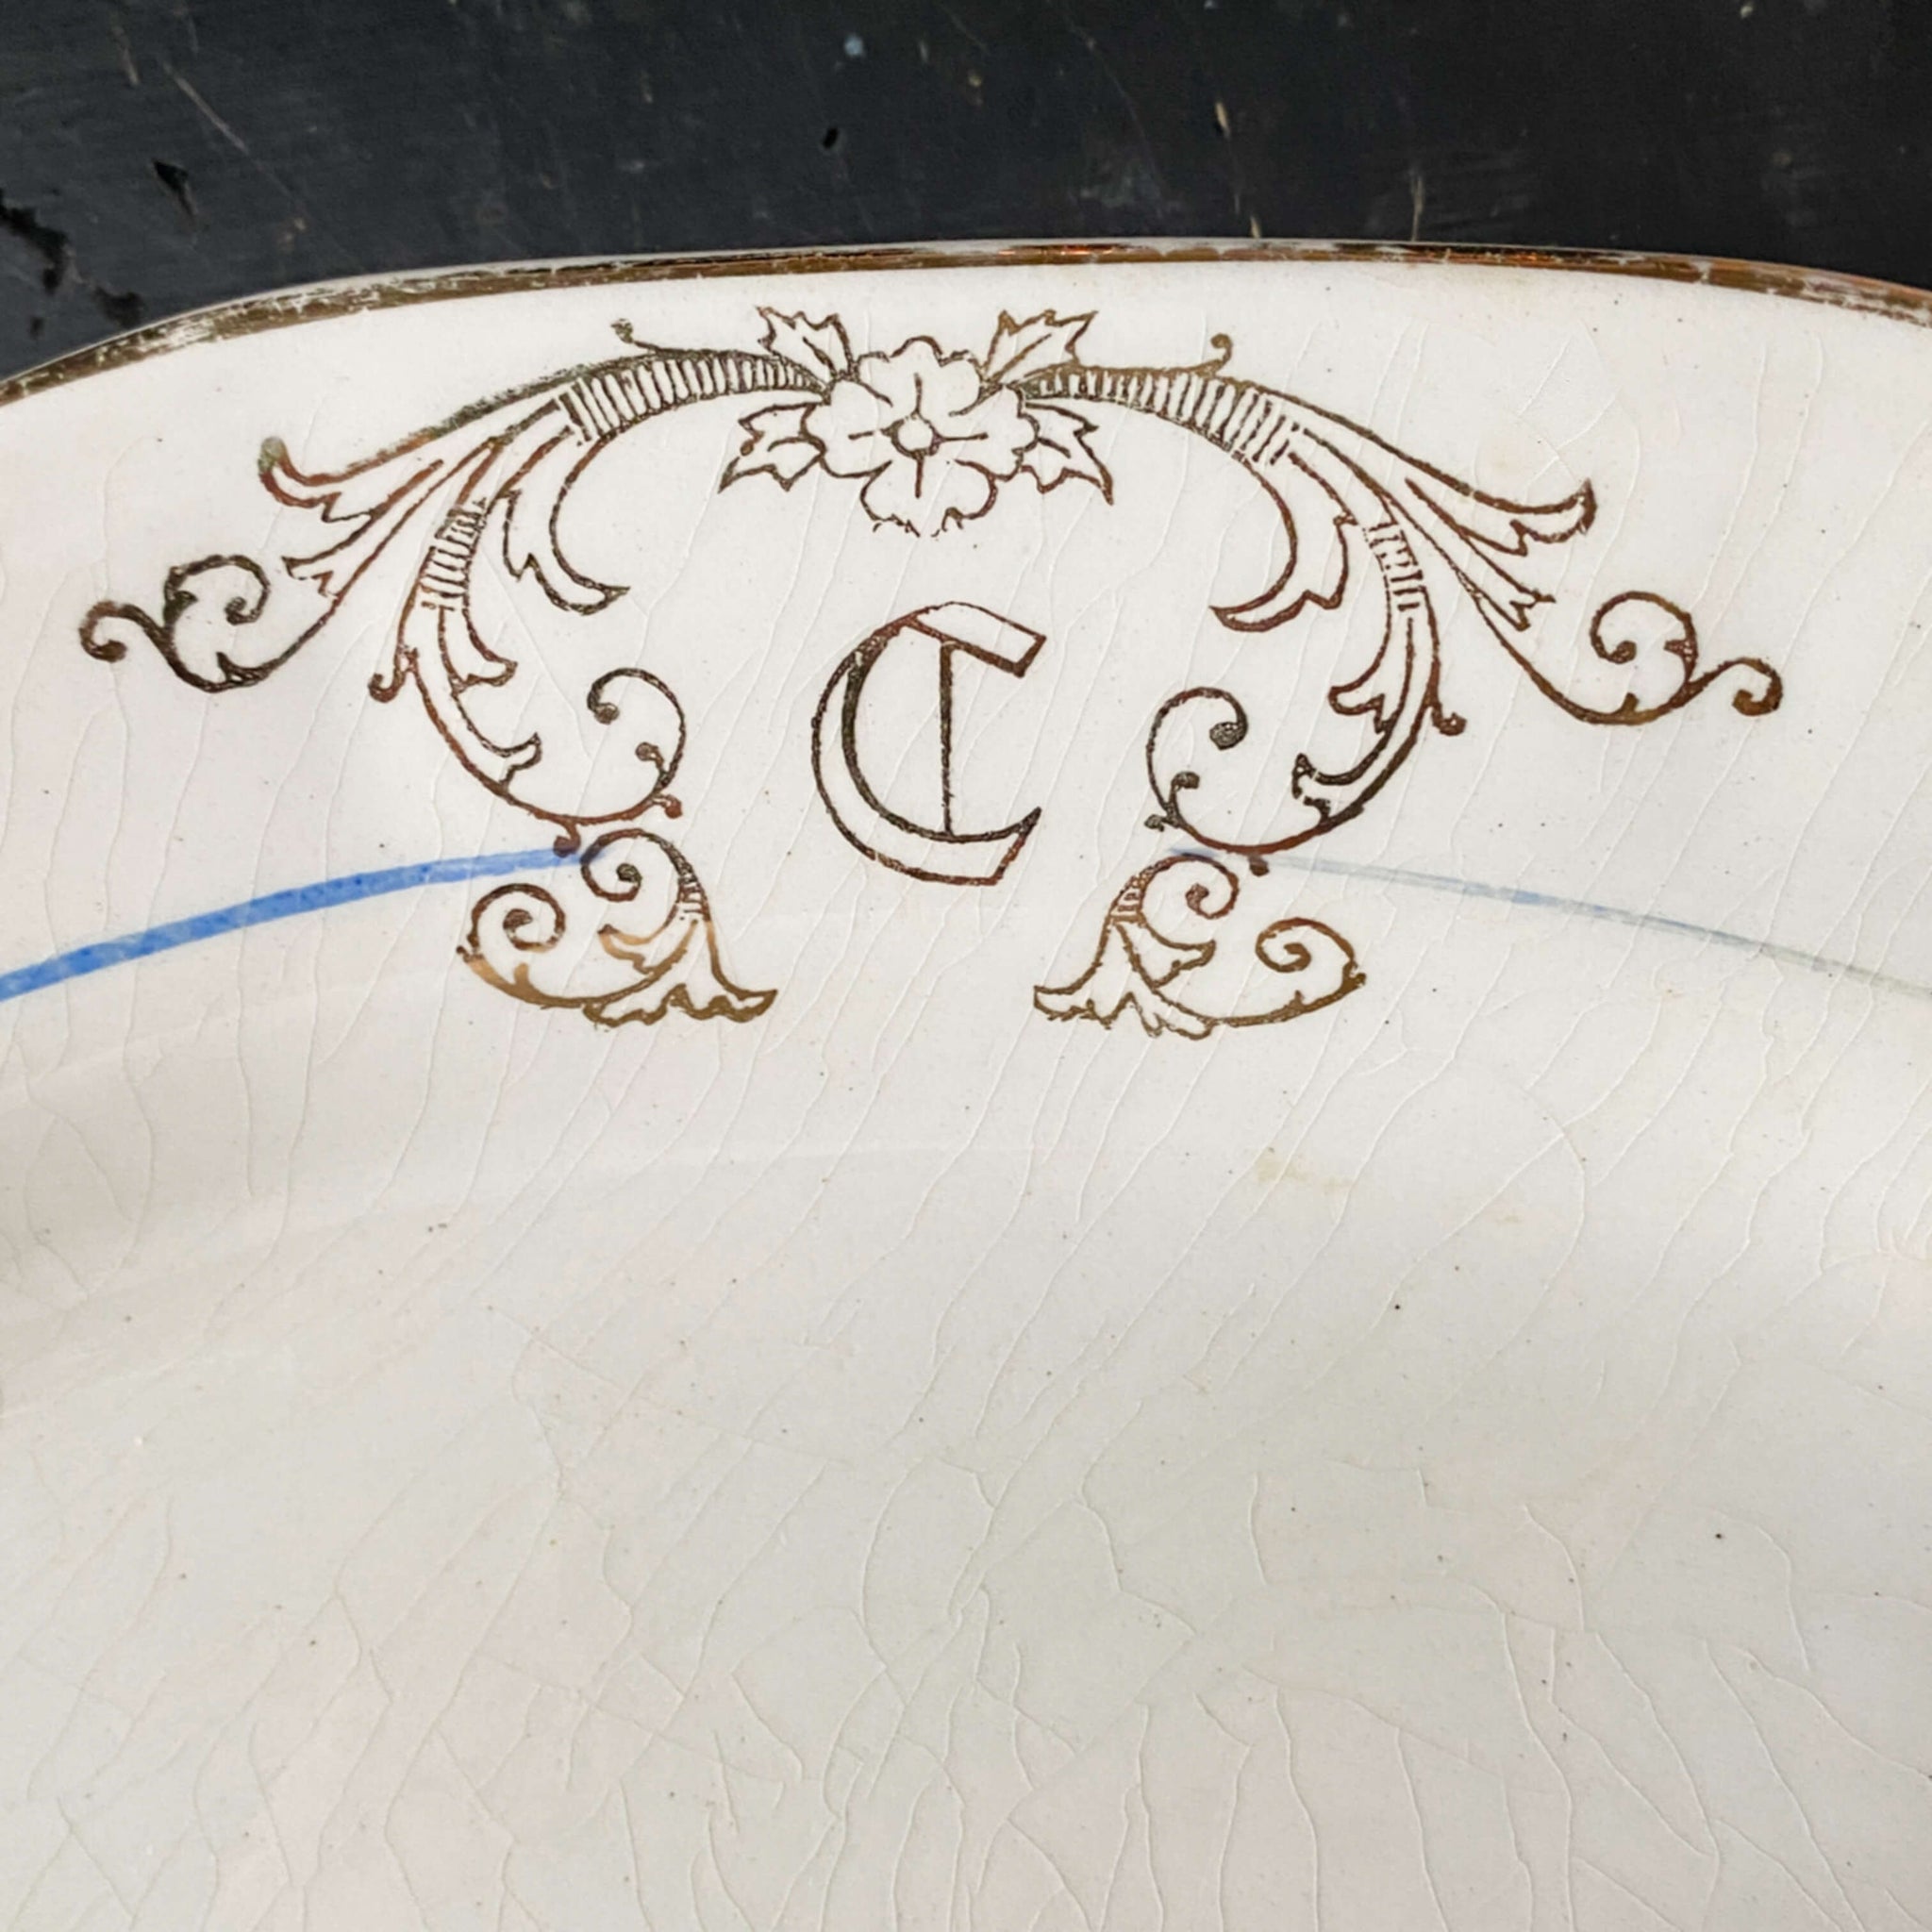 Vintage Monogrammed Platter with the Letter C - Socialite Pattern by the Limoges China circa 1910-1930